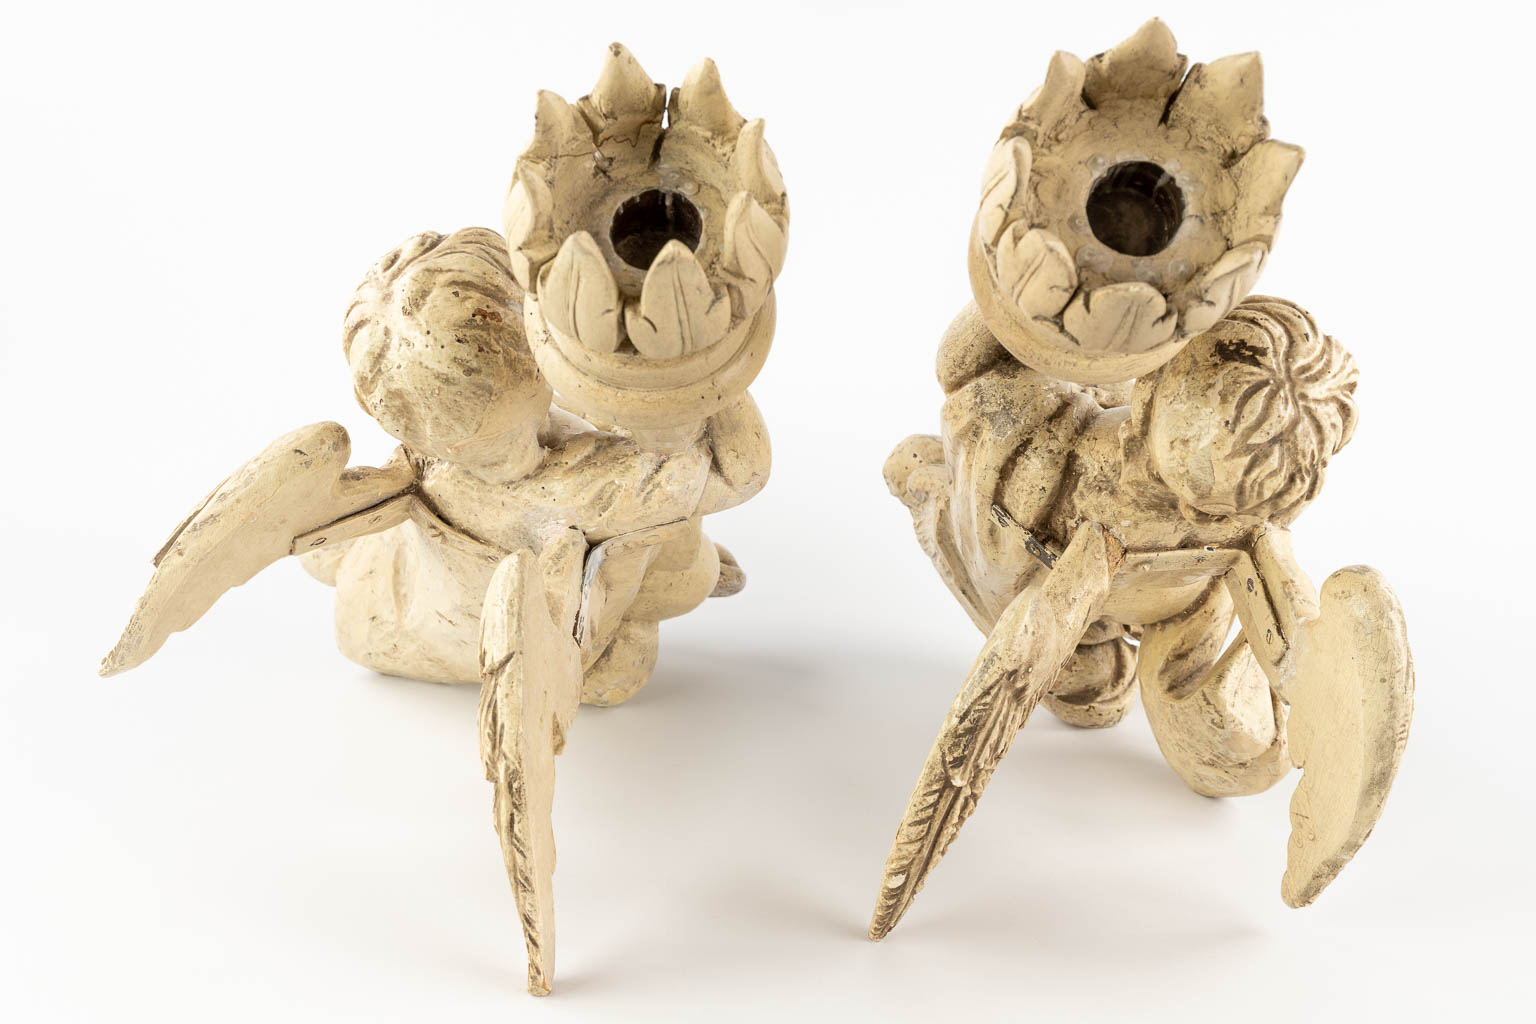 Two antique angels with candle holders, wood sculptured with white patina. 18th C. (W:32 x H:59 cm)